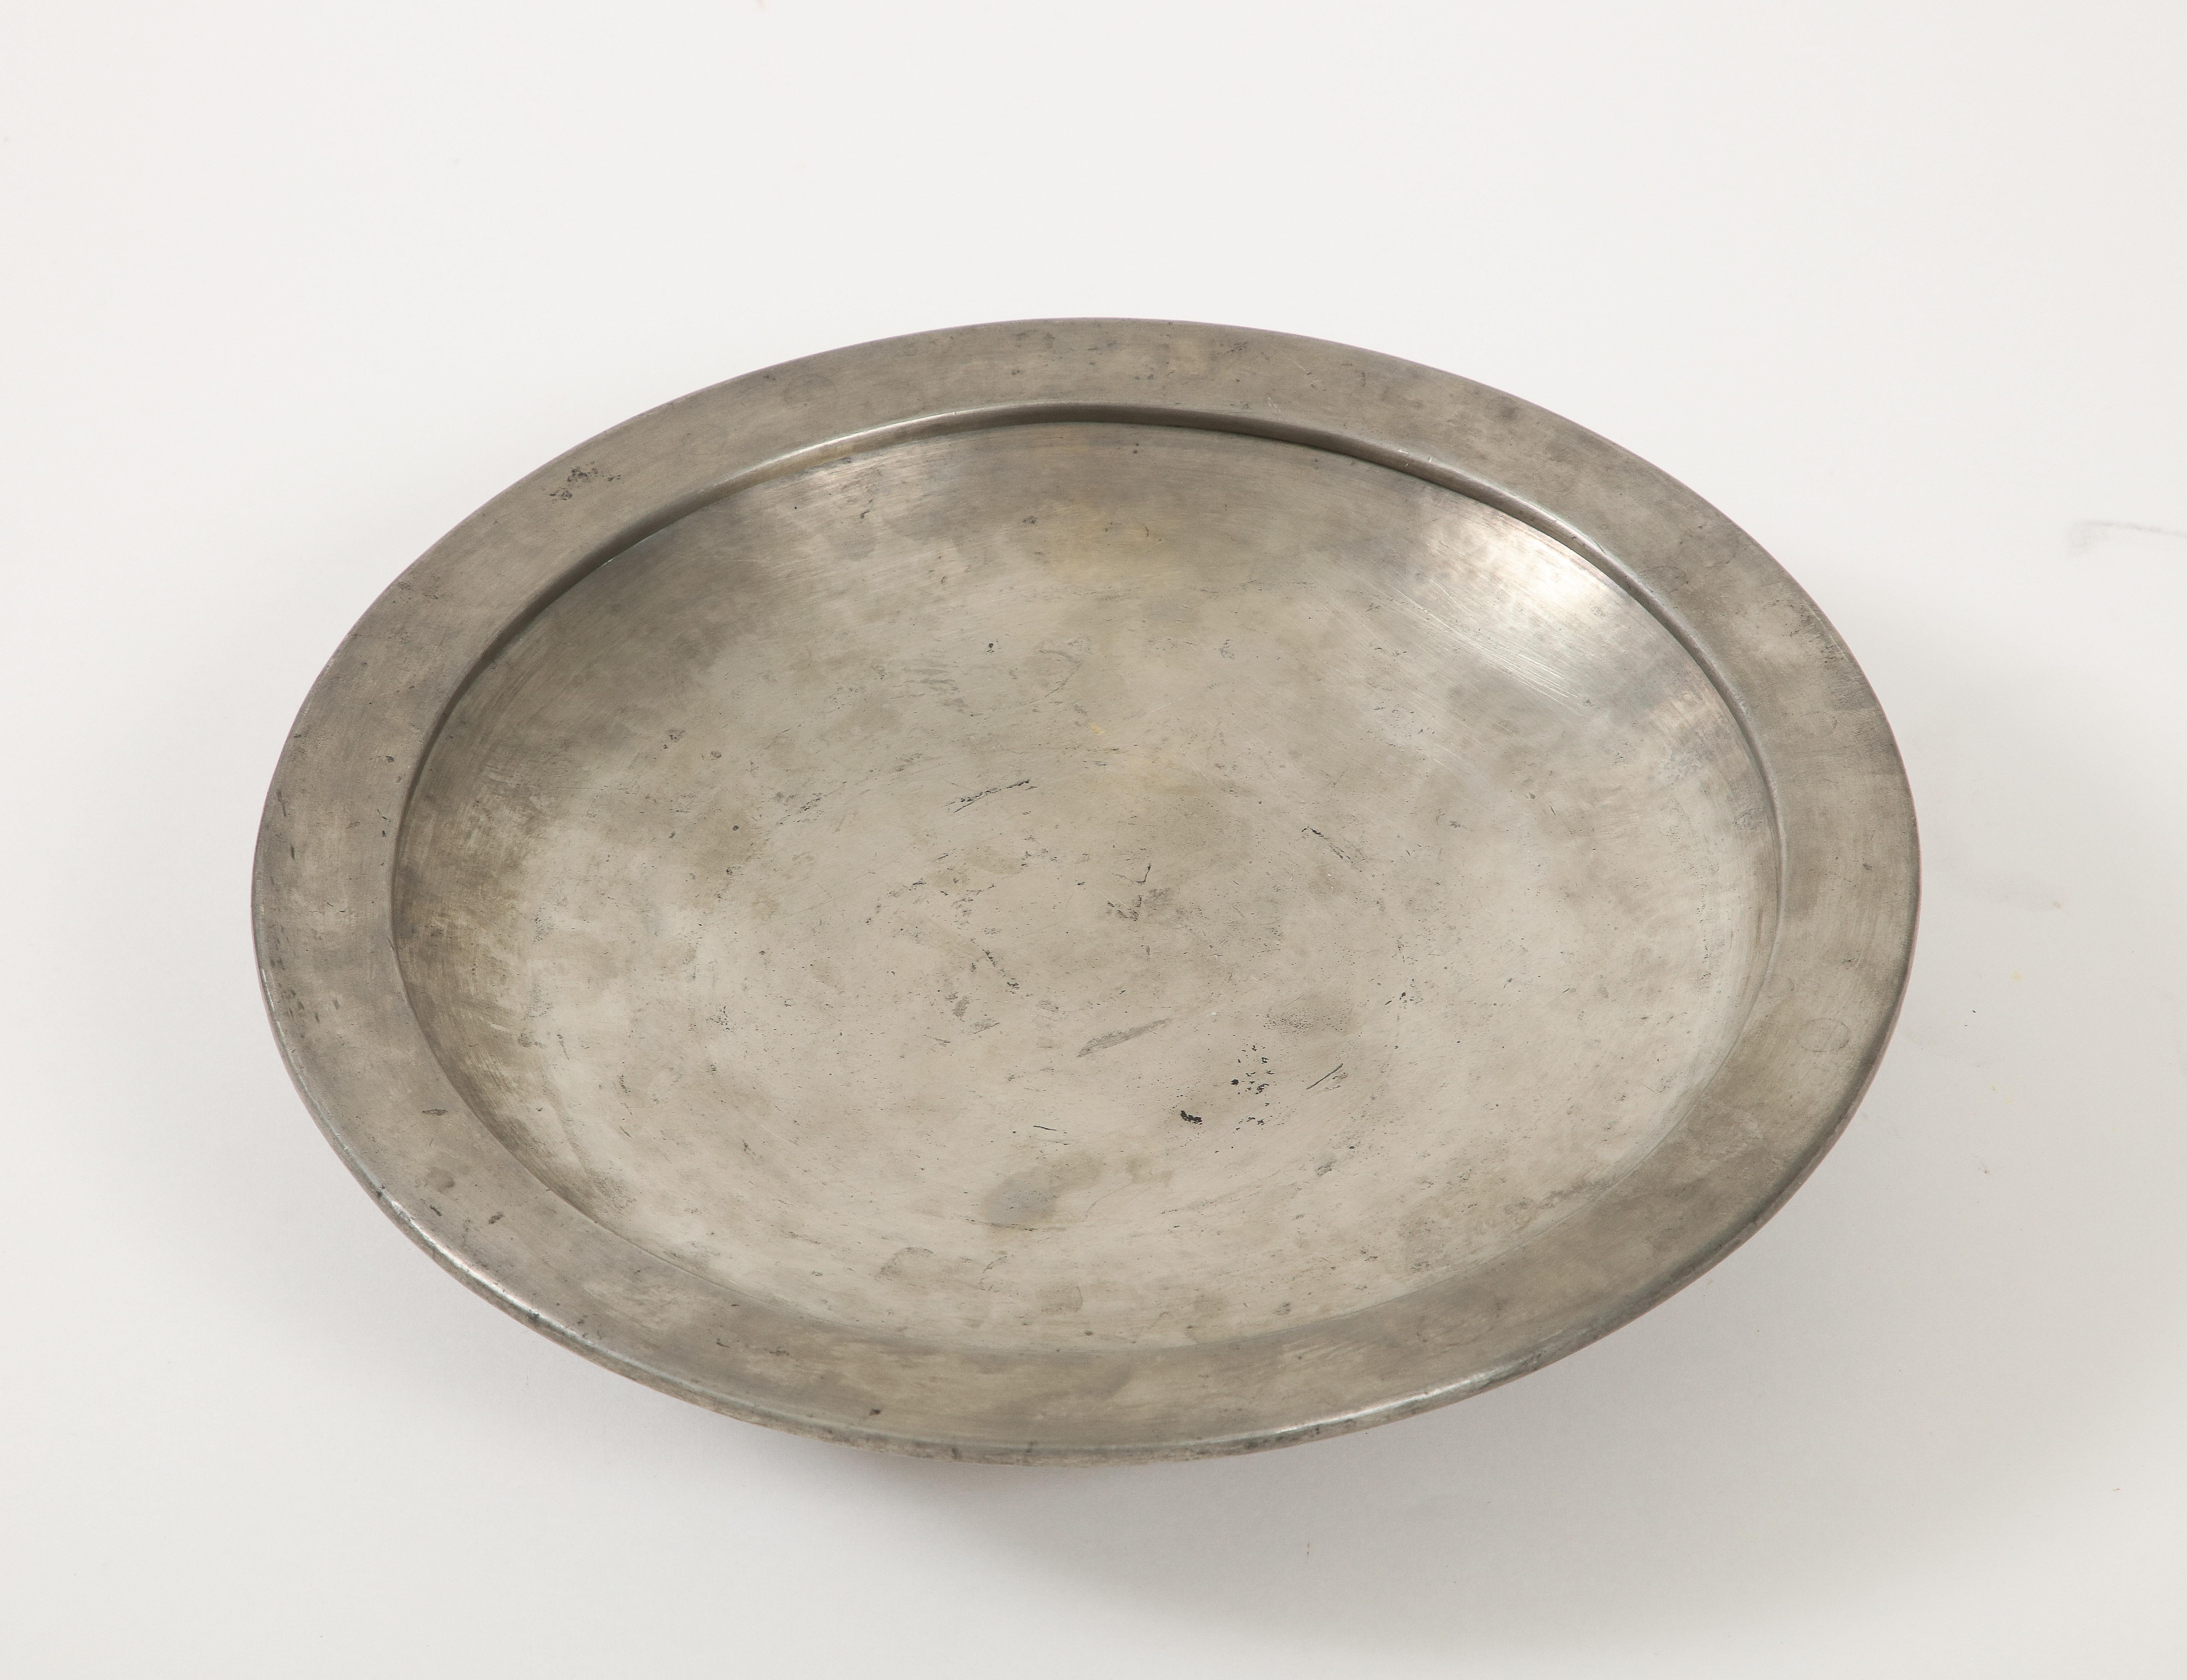 Maurice Daurat
Pewter Bowl
Signed

Best know for making Pewter Noble again in the Modern Era. He is in many private collections nad museums around the world.